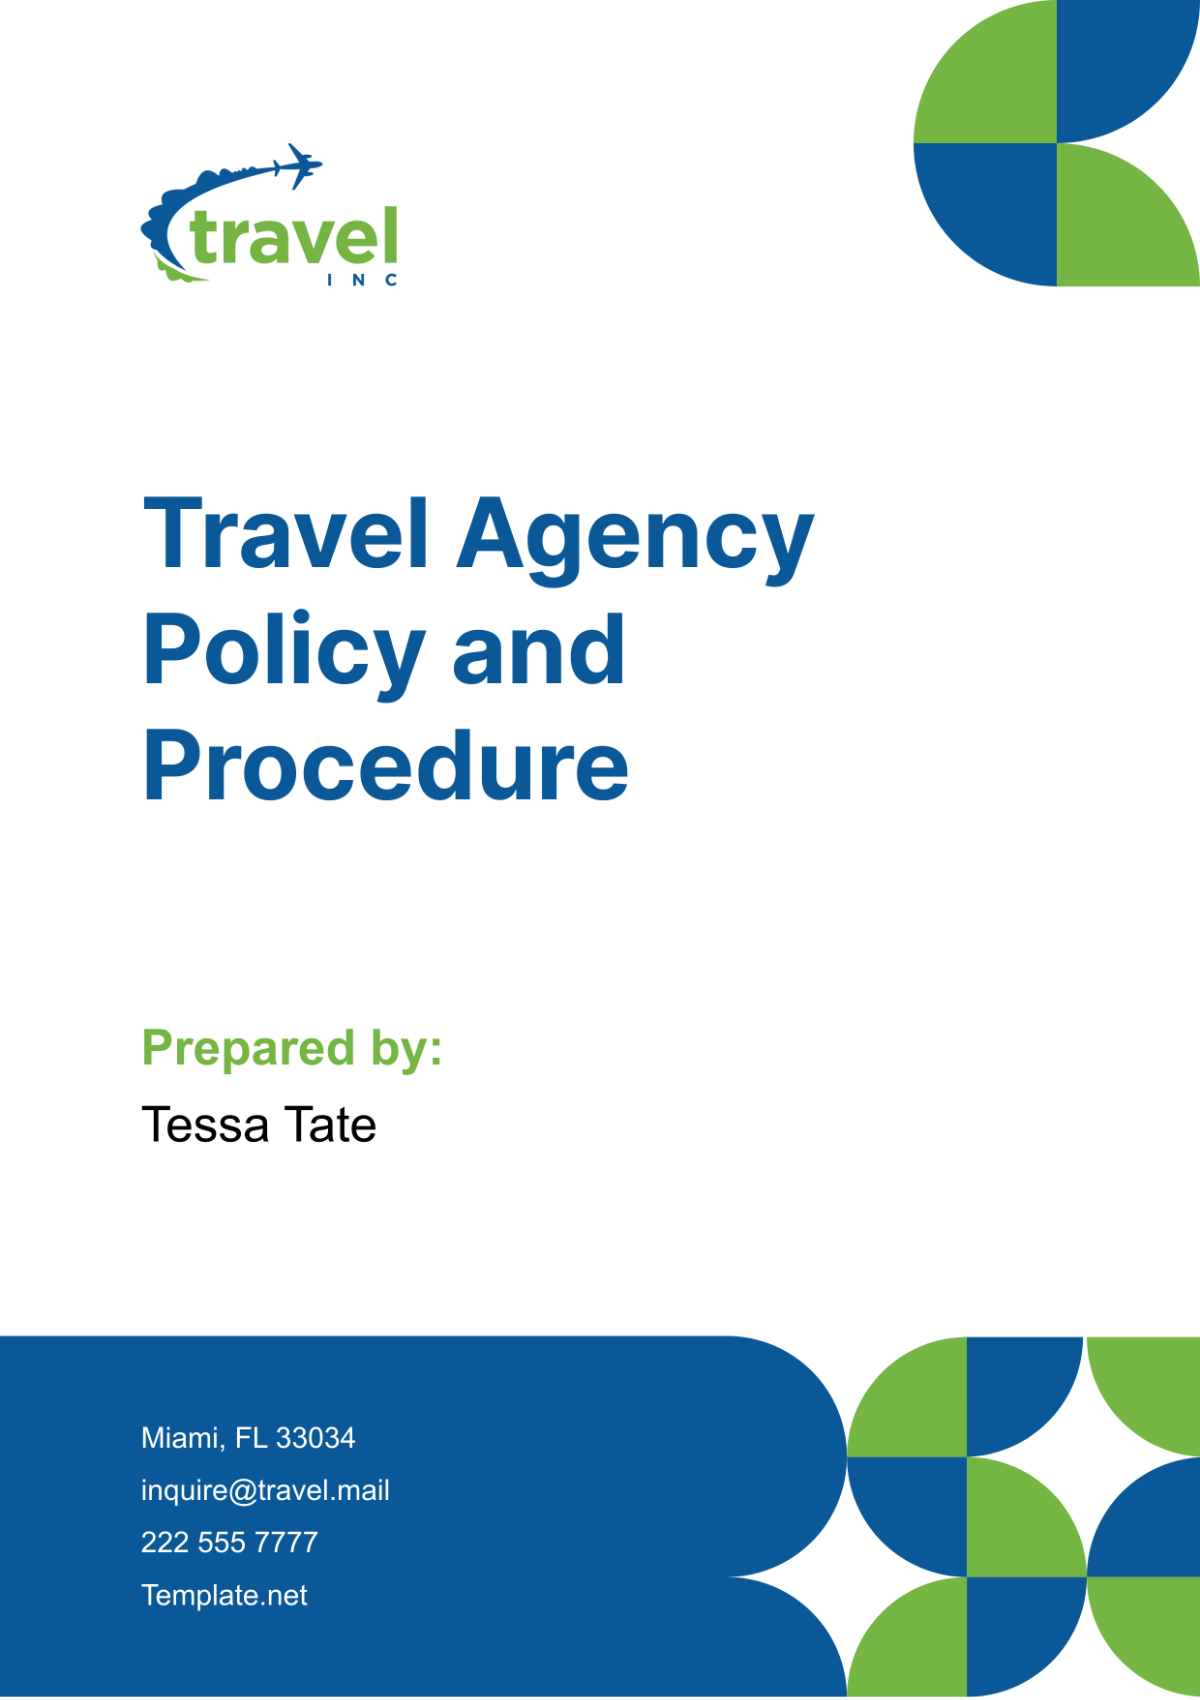 Free Travel Agency Policy and Procedure Template